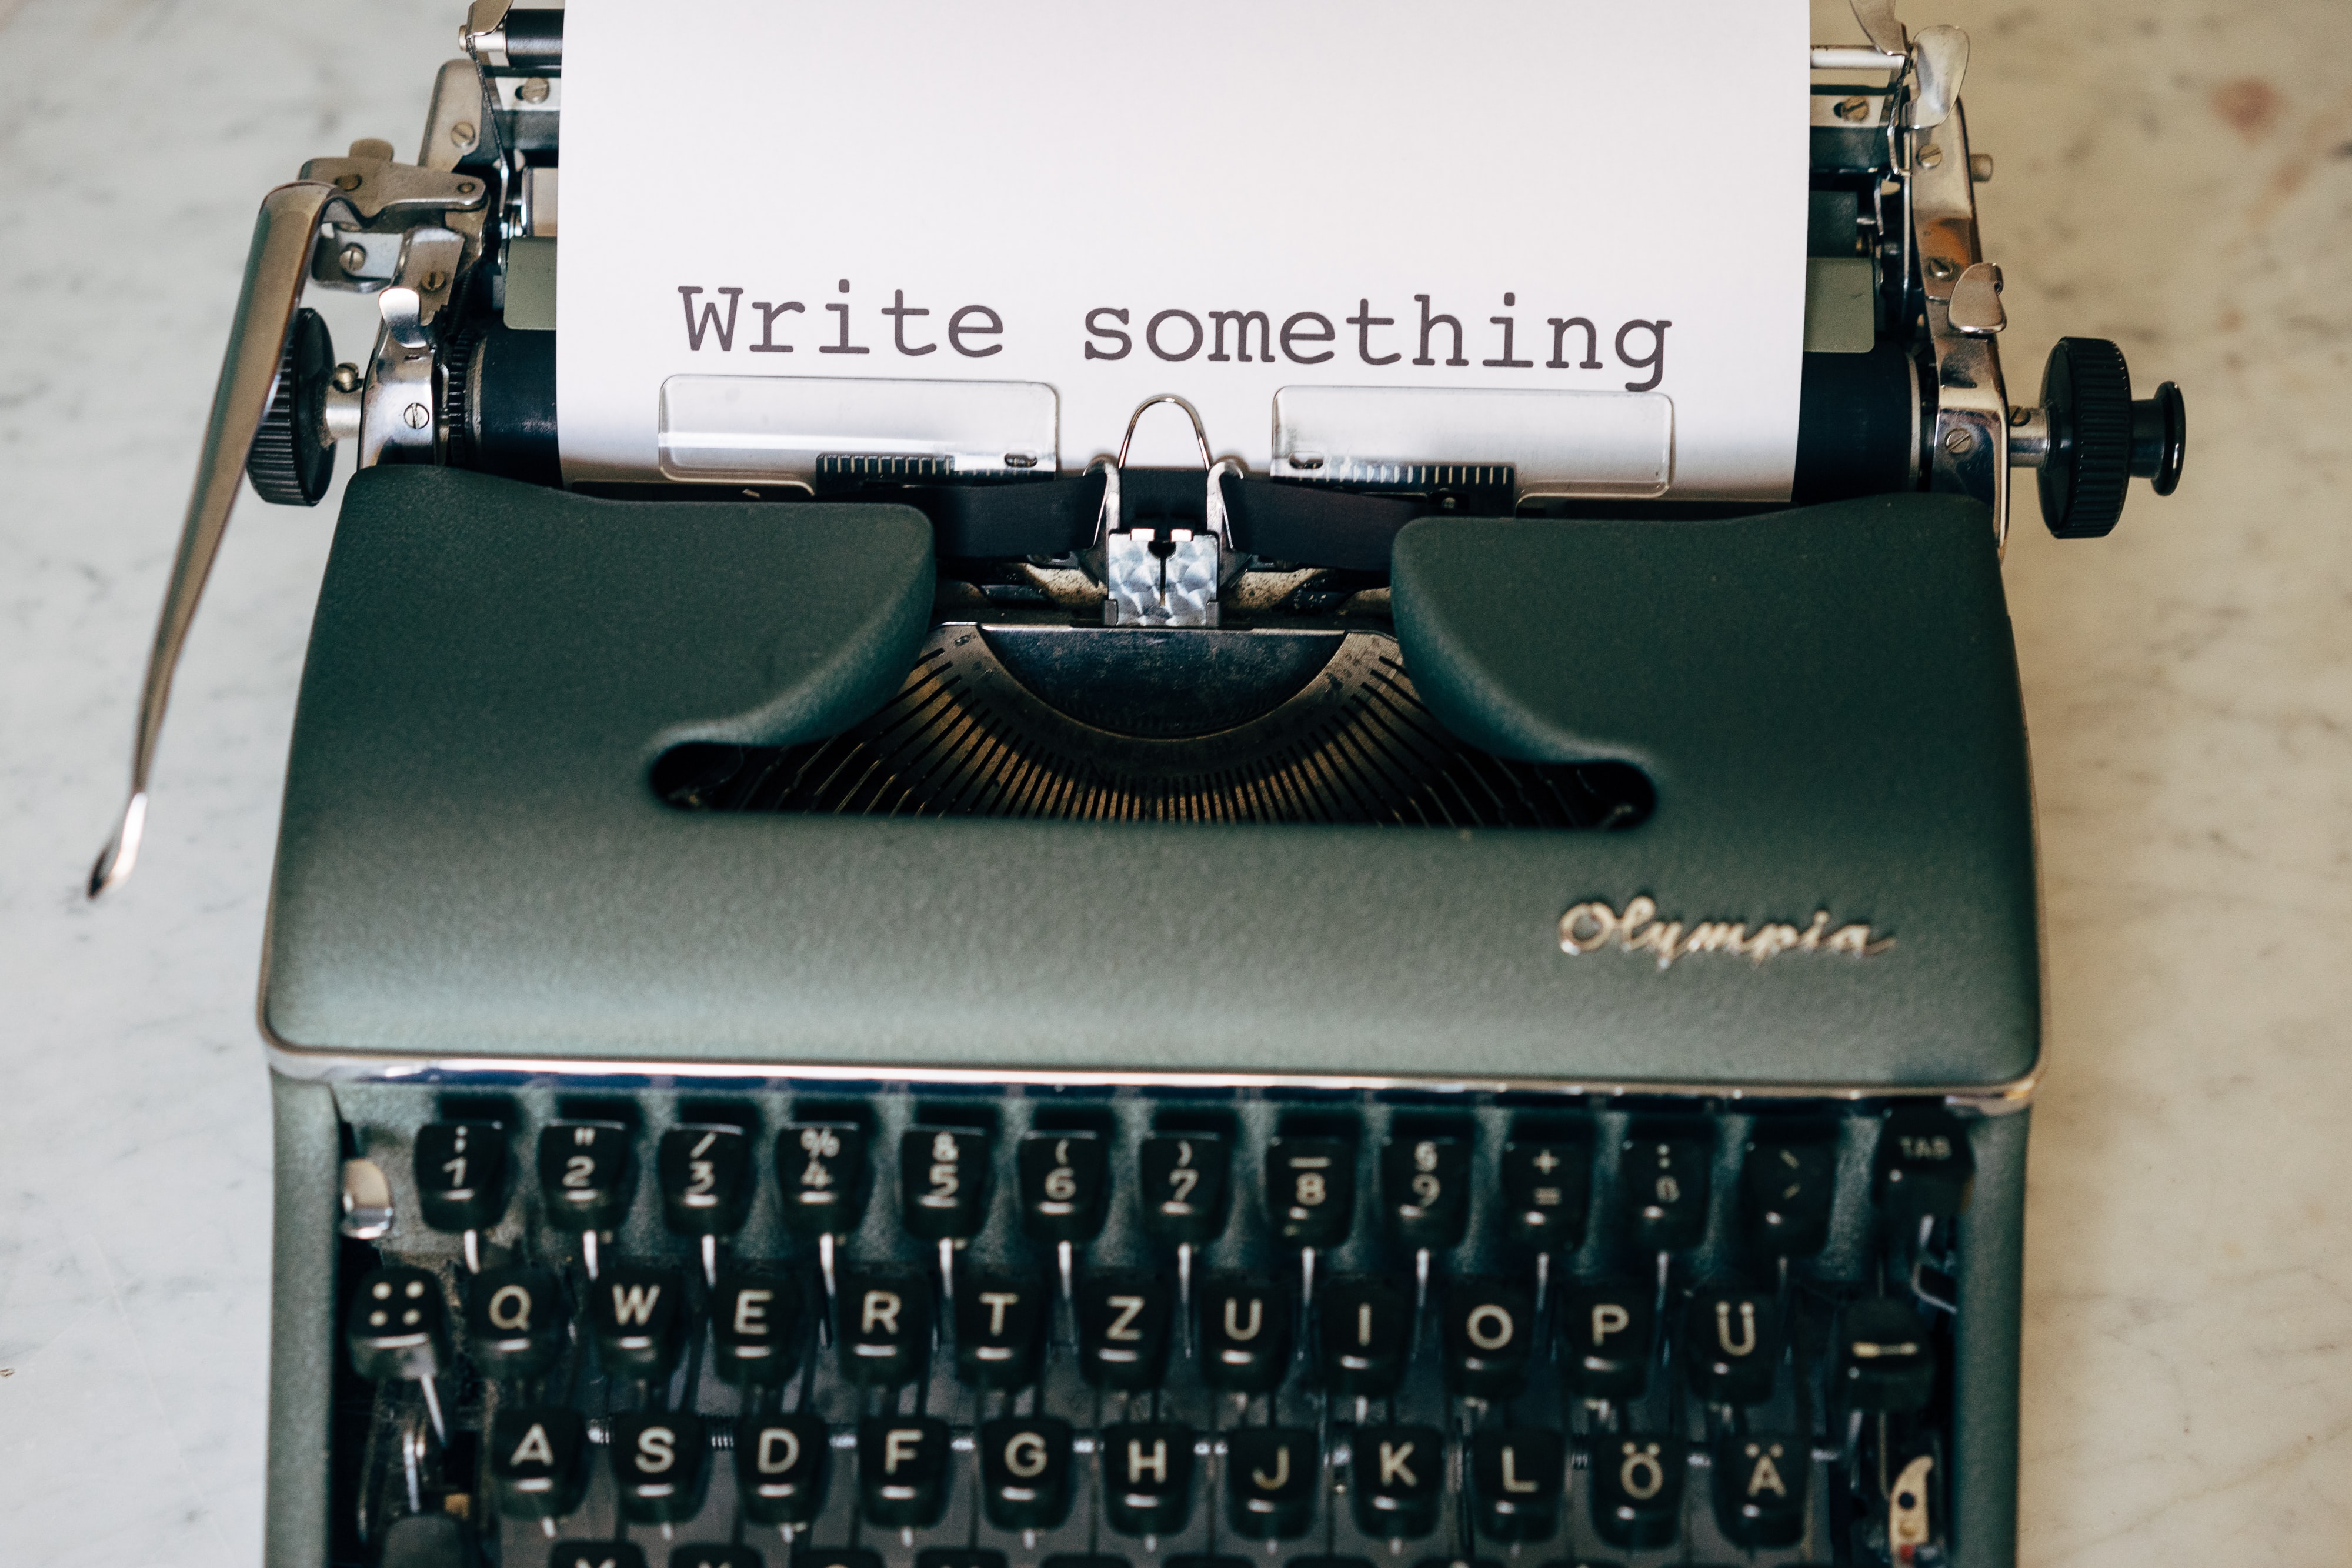 an old fashioned typewrite with a white piece of paper in it that says "write something"